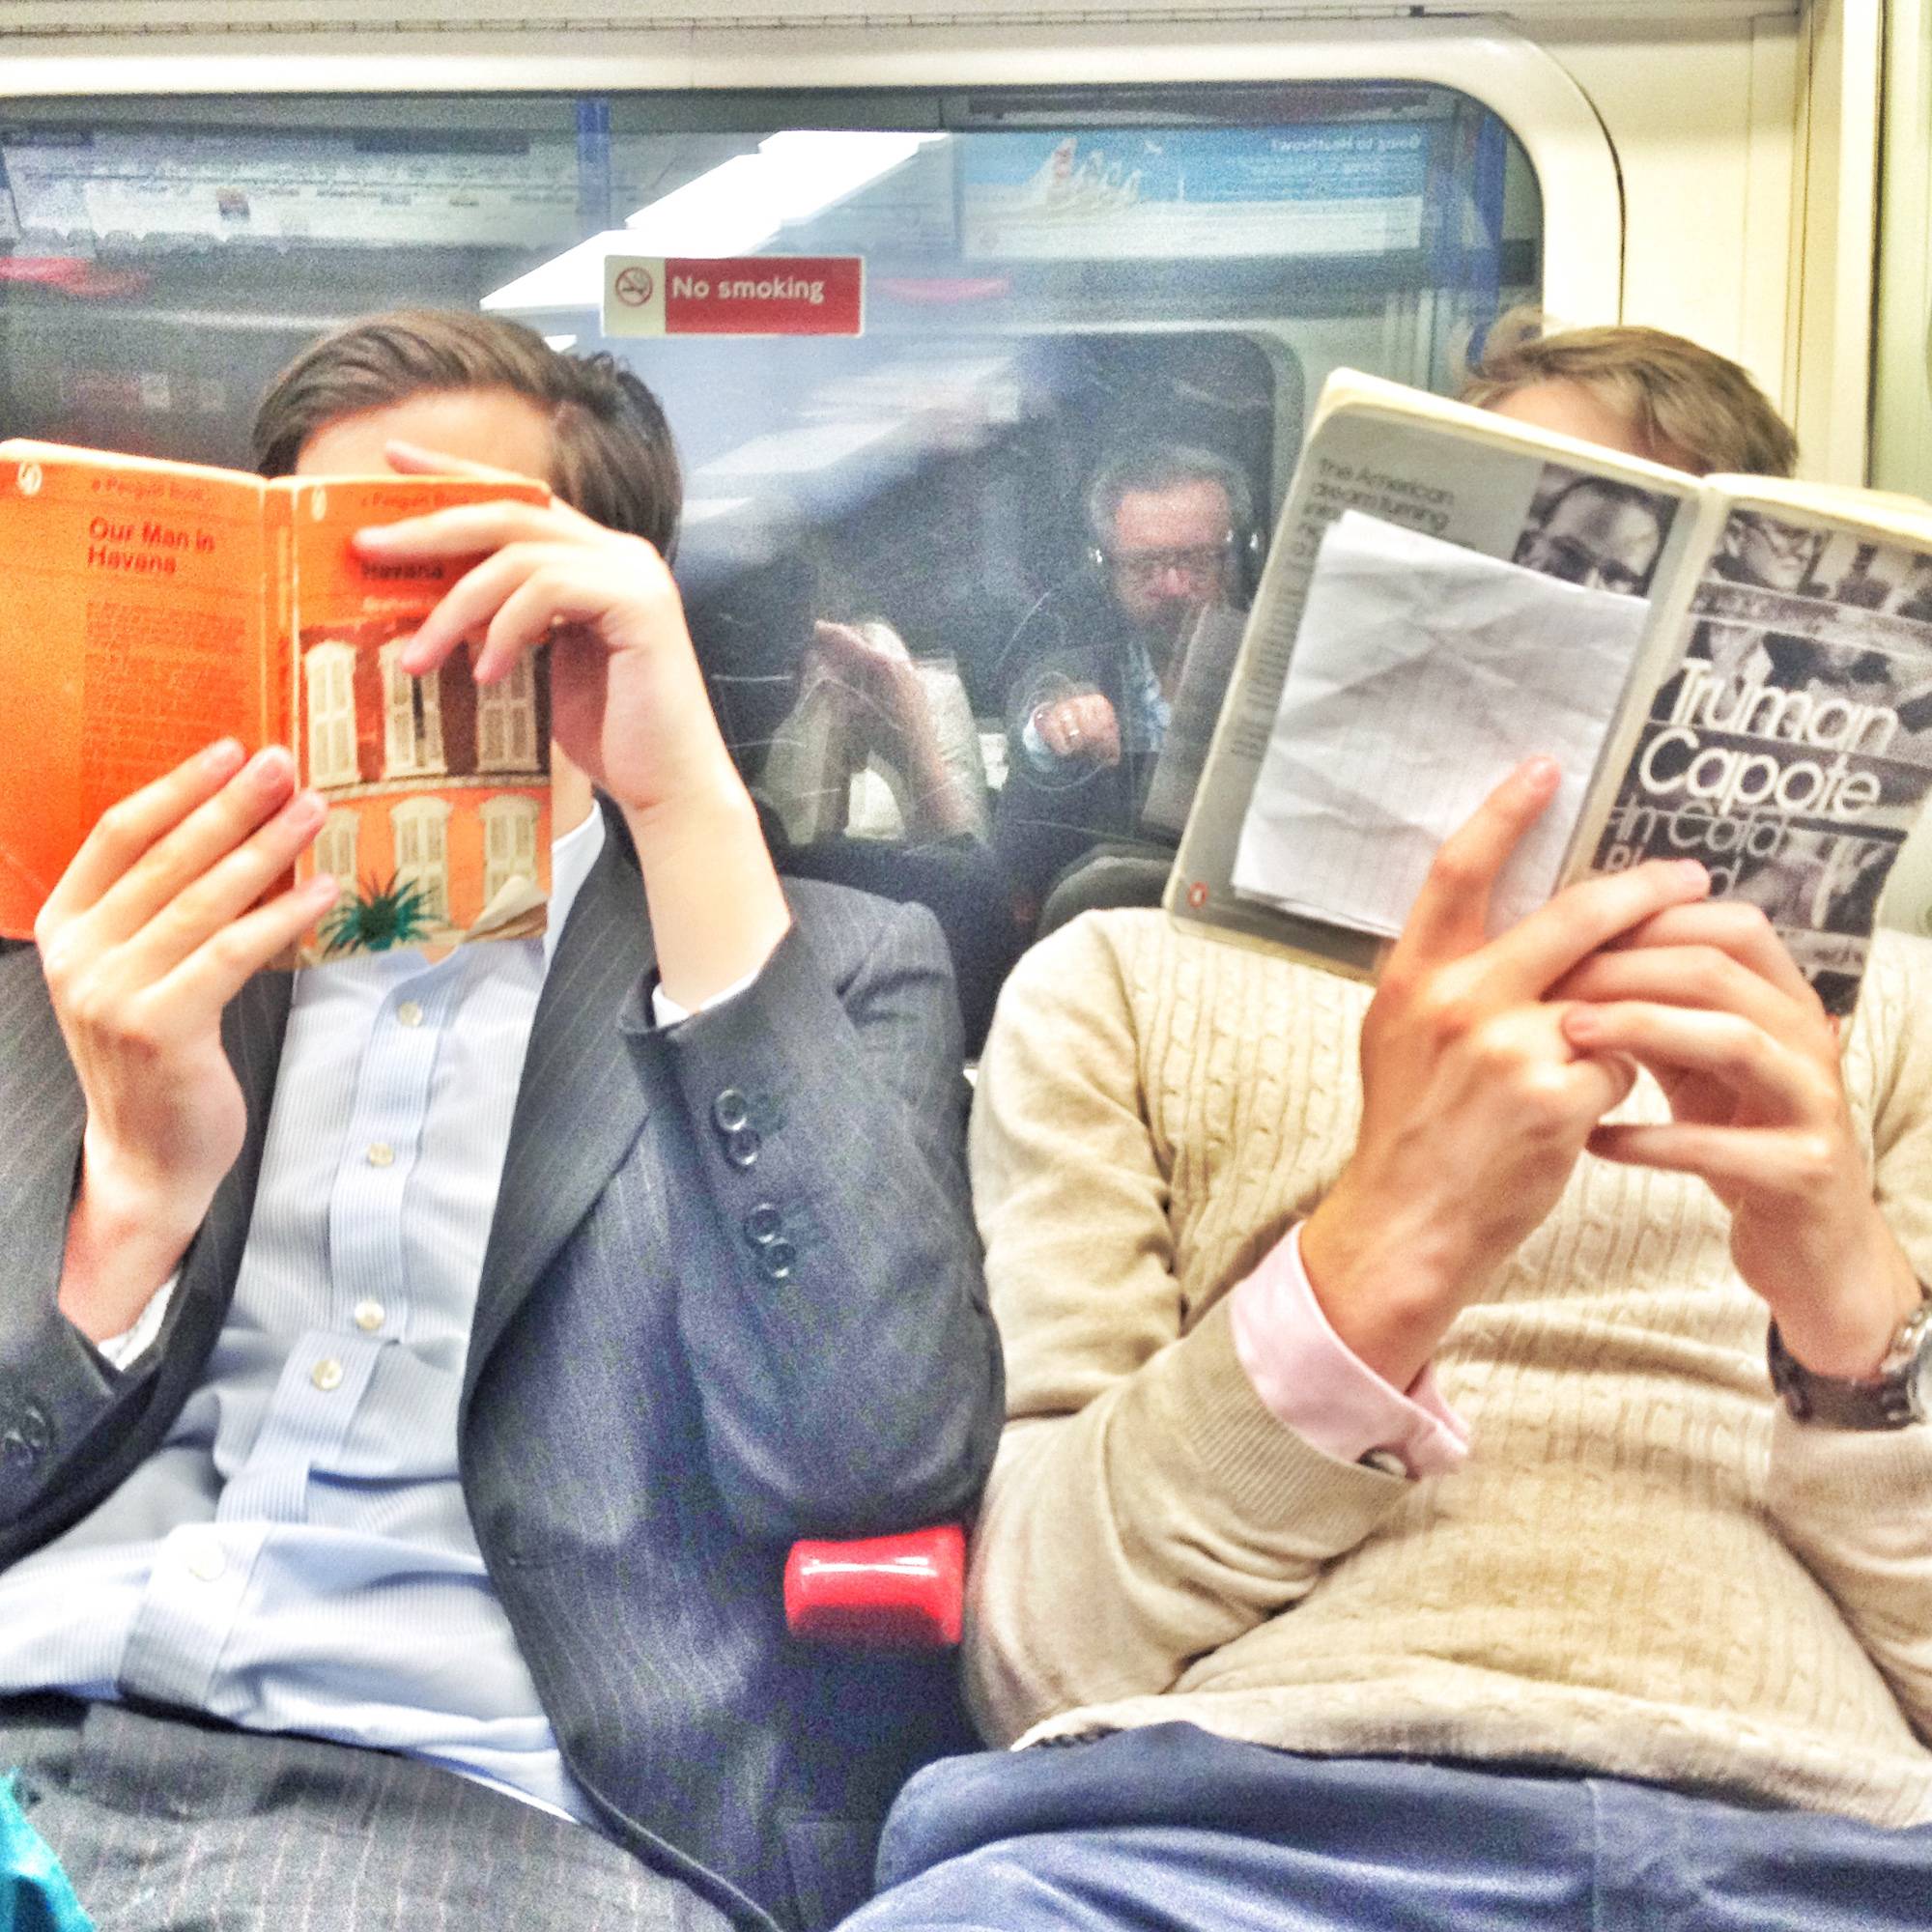 Four London Instagramers give masterclass for national UK newspaper